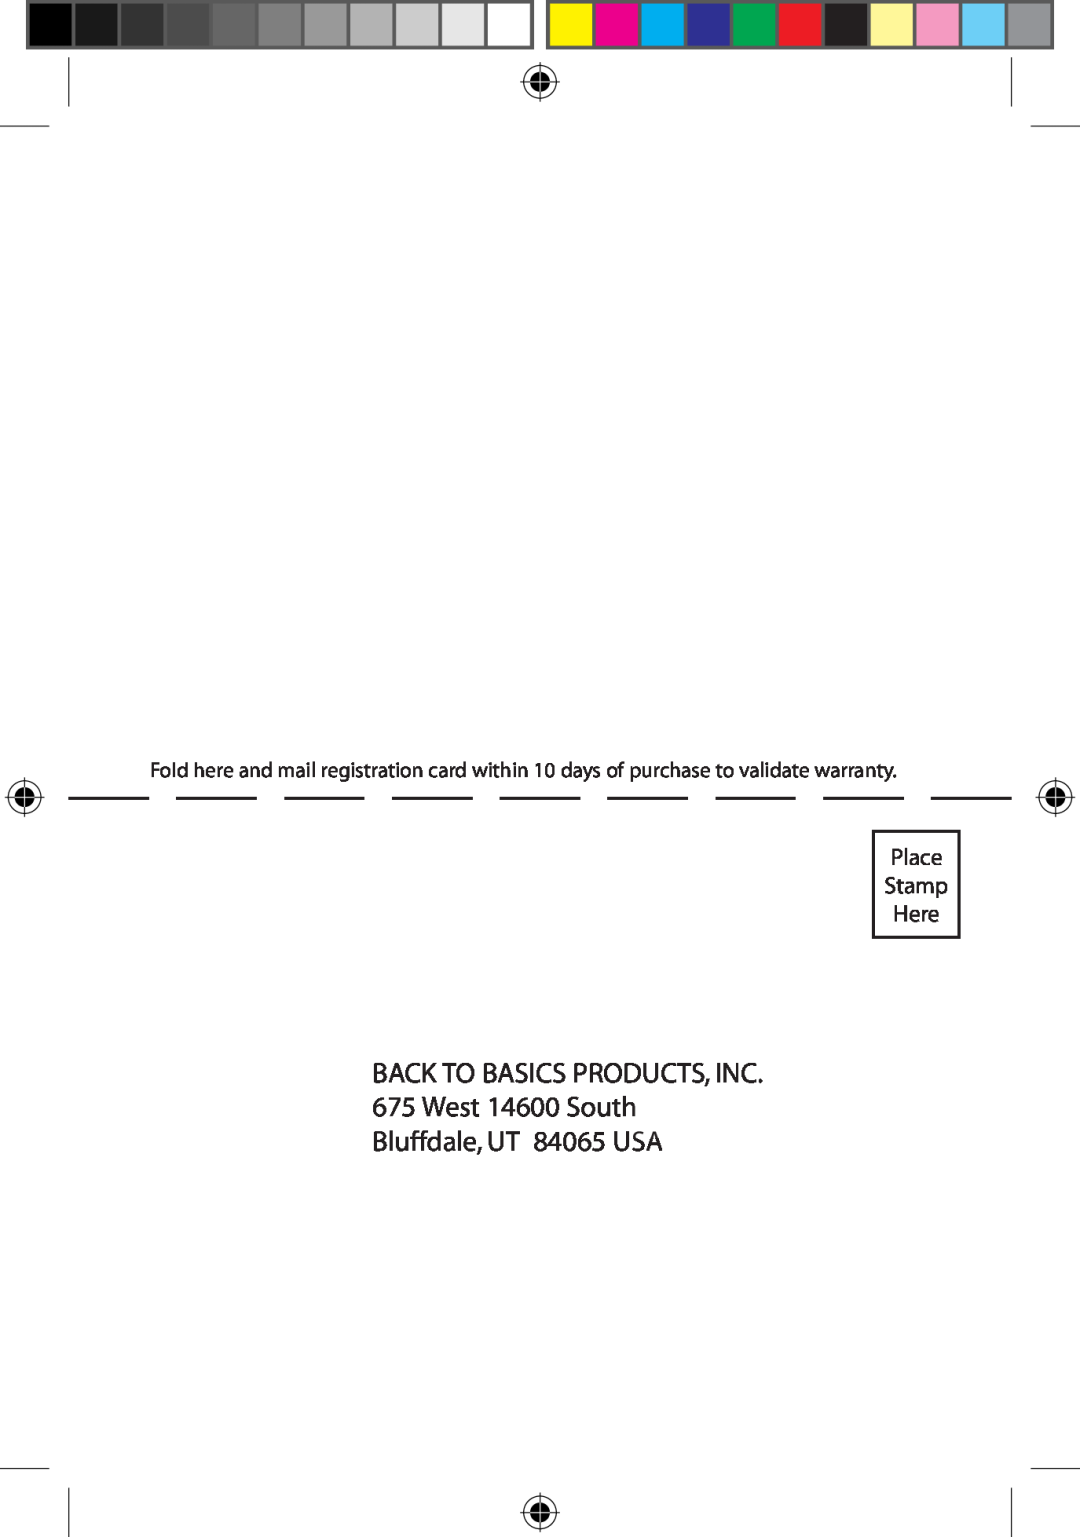 West Bend Back to Basics BPE3BRAUS manual BACK TO BASICS PRODUCTS, INC 675 West 14600 South, Bluffdale, UT 84065 USA 